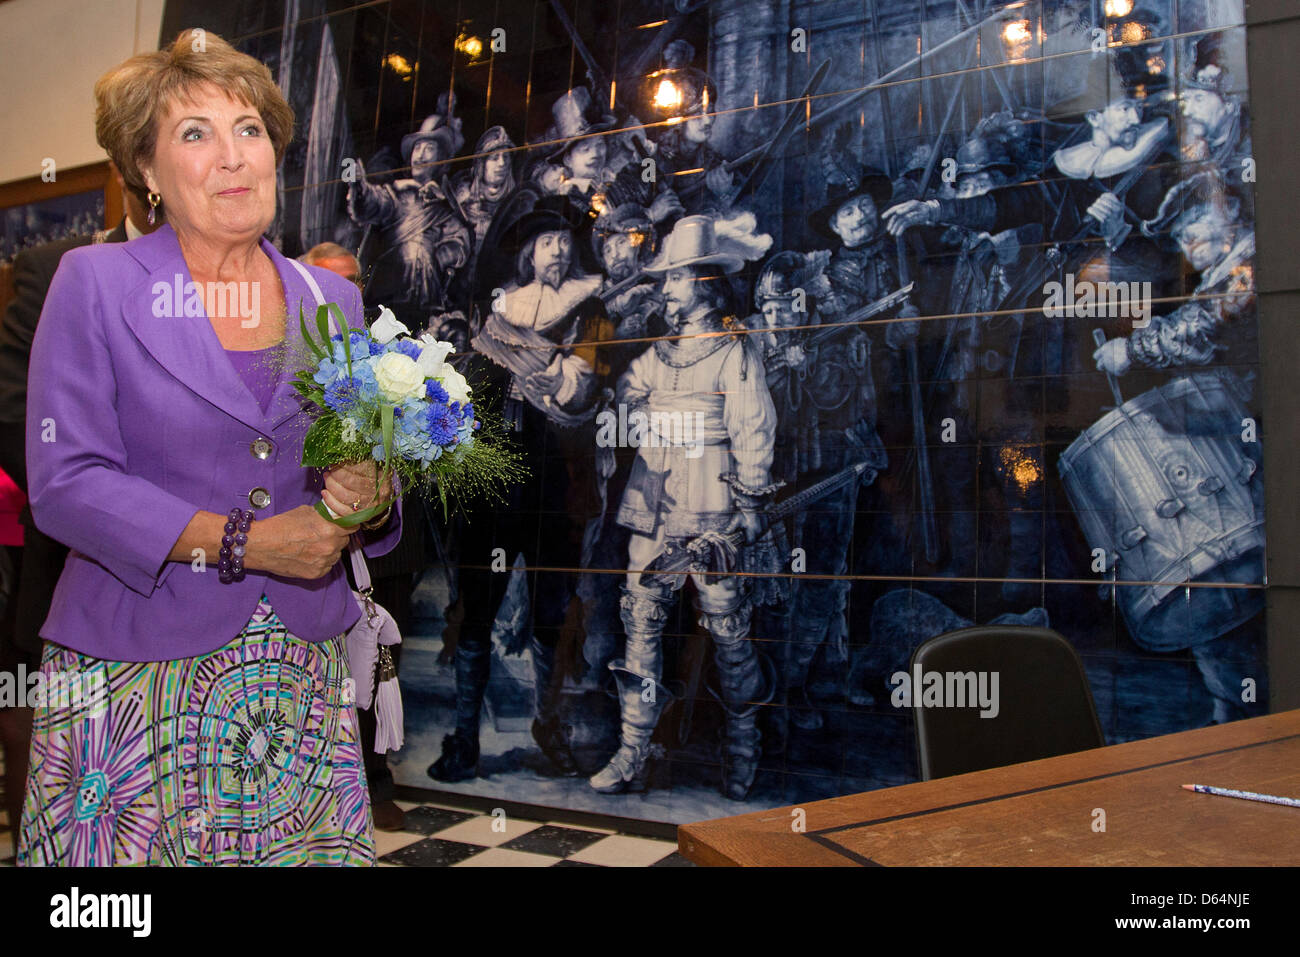 Princess Margriet of The Netherlands opens the Royal Delft Experience multimedia show in the 'Porceleyne Fles' - the Royal Porcelain factory in Delft, The Netherlands, 31 May 2012. Photo: Patrick van Katwijk - NETERLANDS OUT Stock Photo